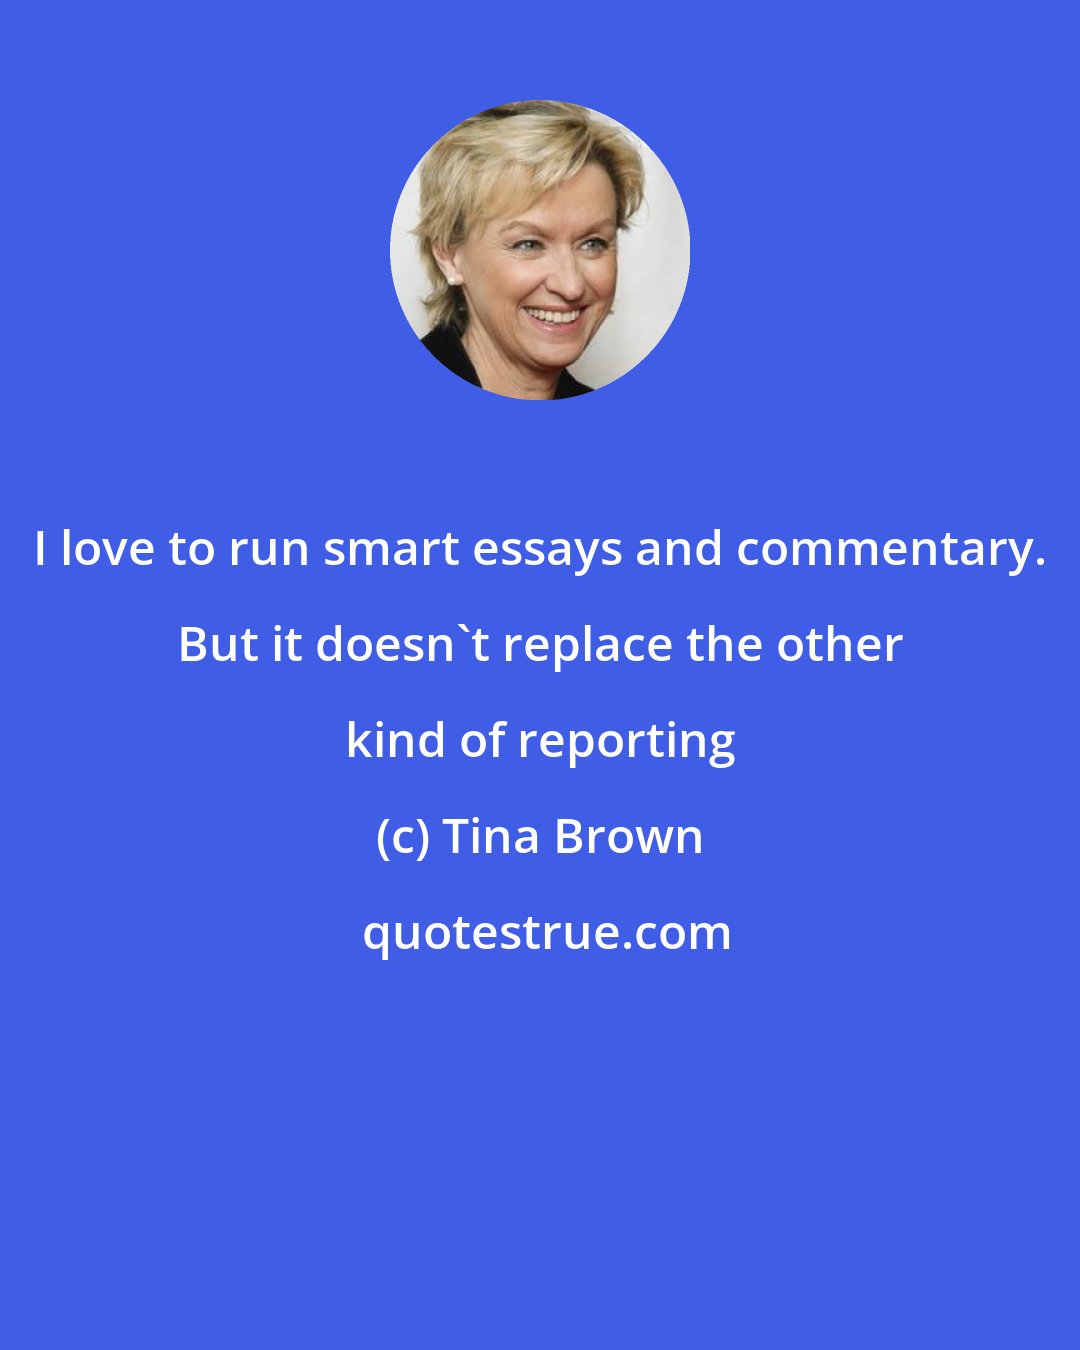 Tina Brown: I love to run smart essays and commentary. But it doesn't replace the other kind of reporting